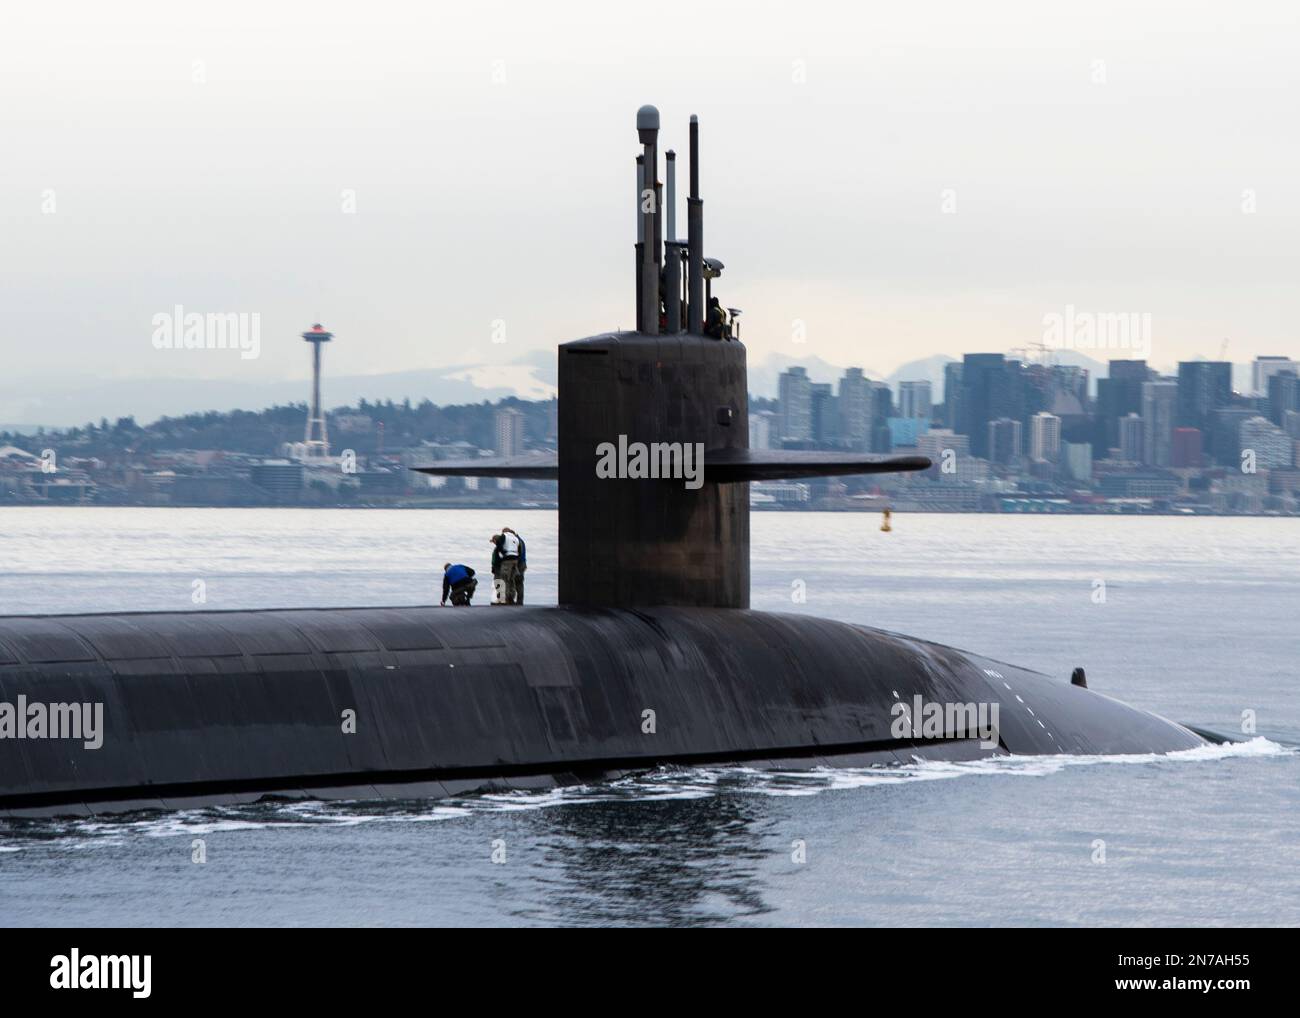 230209-N-ED185-1331  PUGET SOUND, Wash. (Feb. 9, 2023) The Ohio-class ballistic missile submarine USS Louisiana (SSBN 743) transits Puget Sound past the Seattle skyline following a 41-month engineered refueling overhaul at Puget Sound Naval Shipyard and Intermediate Maintenance Facility, February 9, 2023. Louisiana is one of eight ballistic-missile submarines stationed at Naval Base Kitsap-Bangor, providing the most survivable leg of the strategic deterrence triad for the United States. (U.S. Navy photo by Mass Communication Specialist 1st Class Brian G. Reynolds) Stock Photo